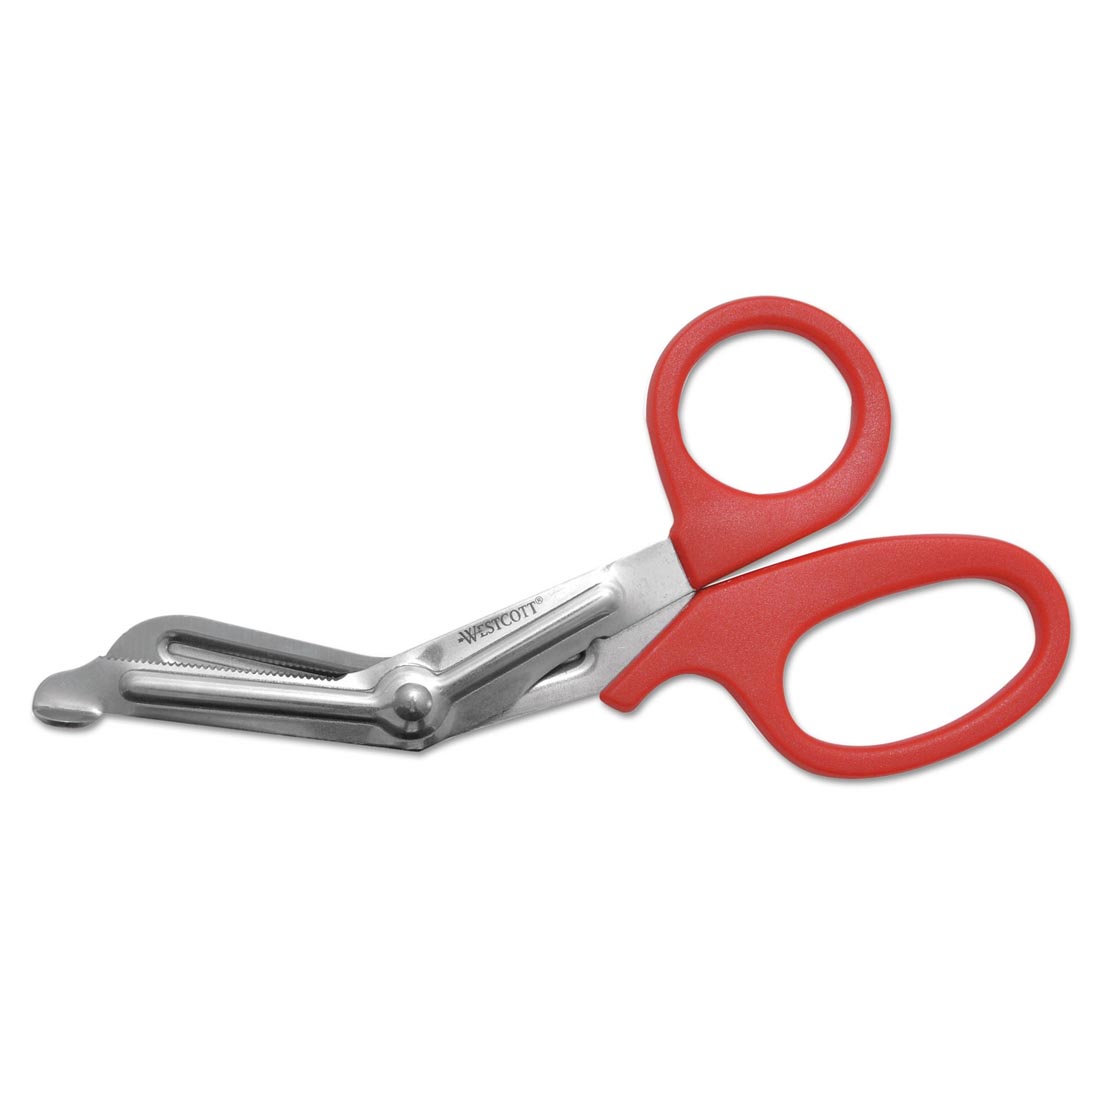 angled scissors with red handles